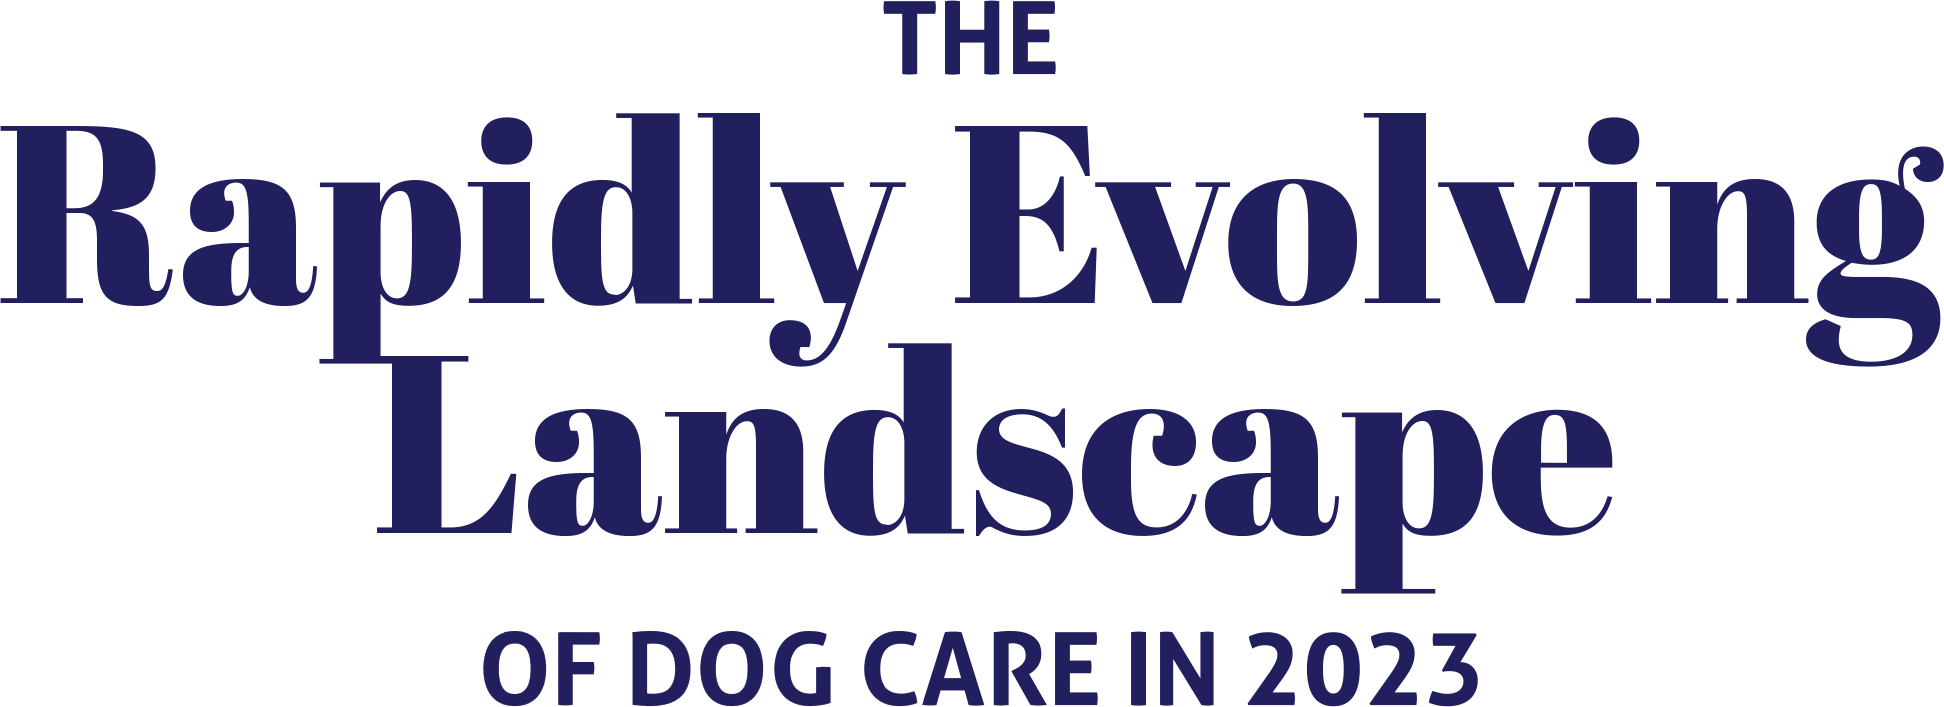 The Rapidly Evolving Landscape of Dog Care In 2023